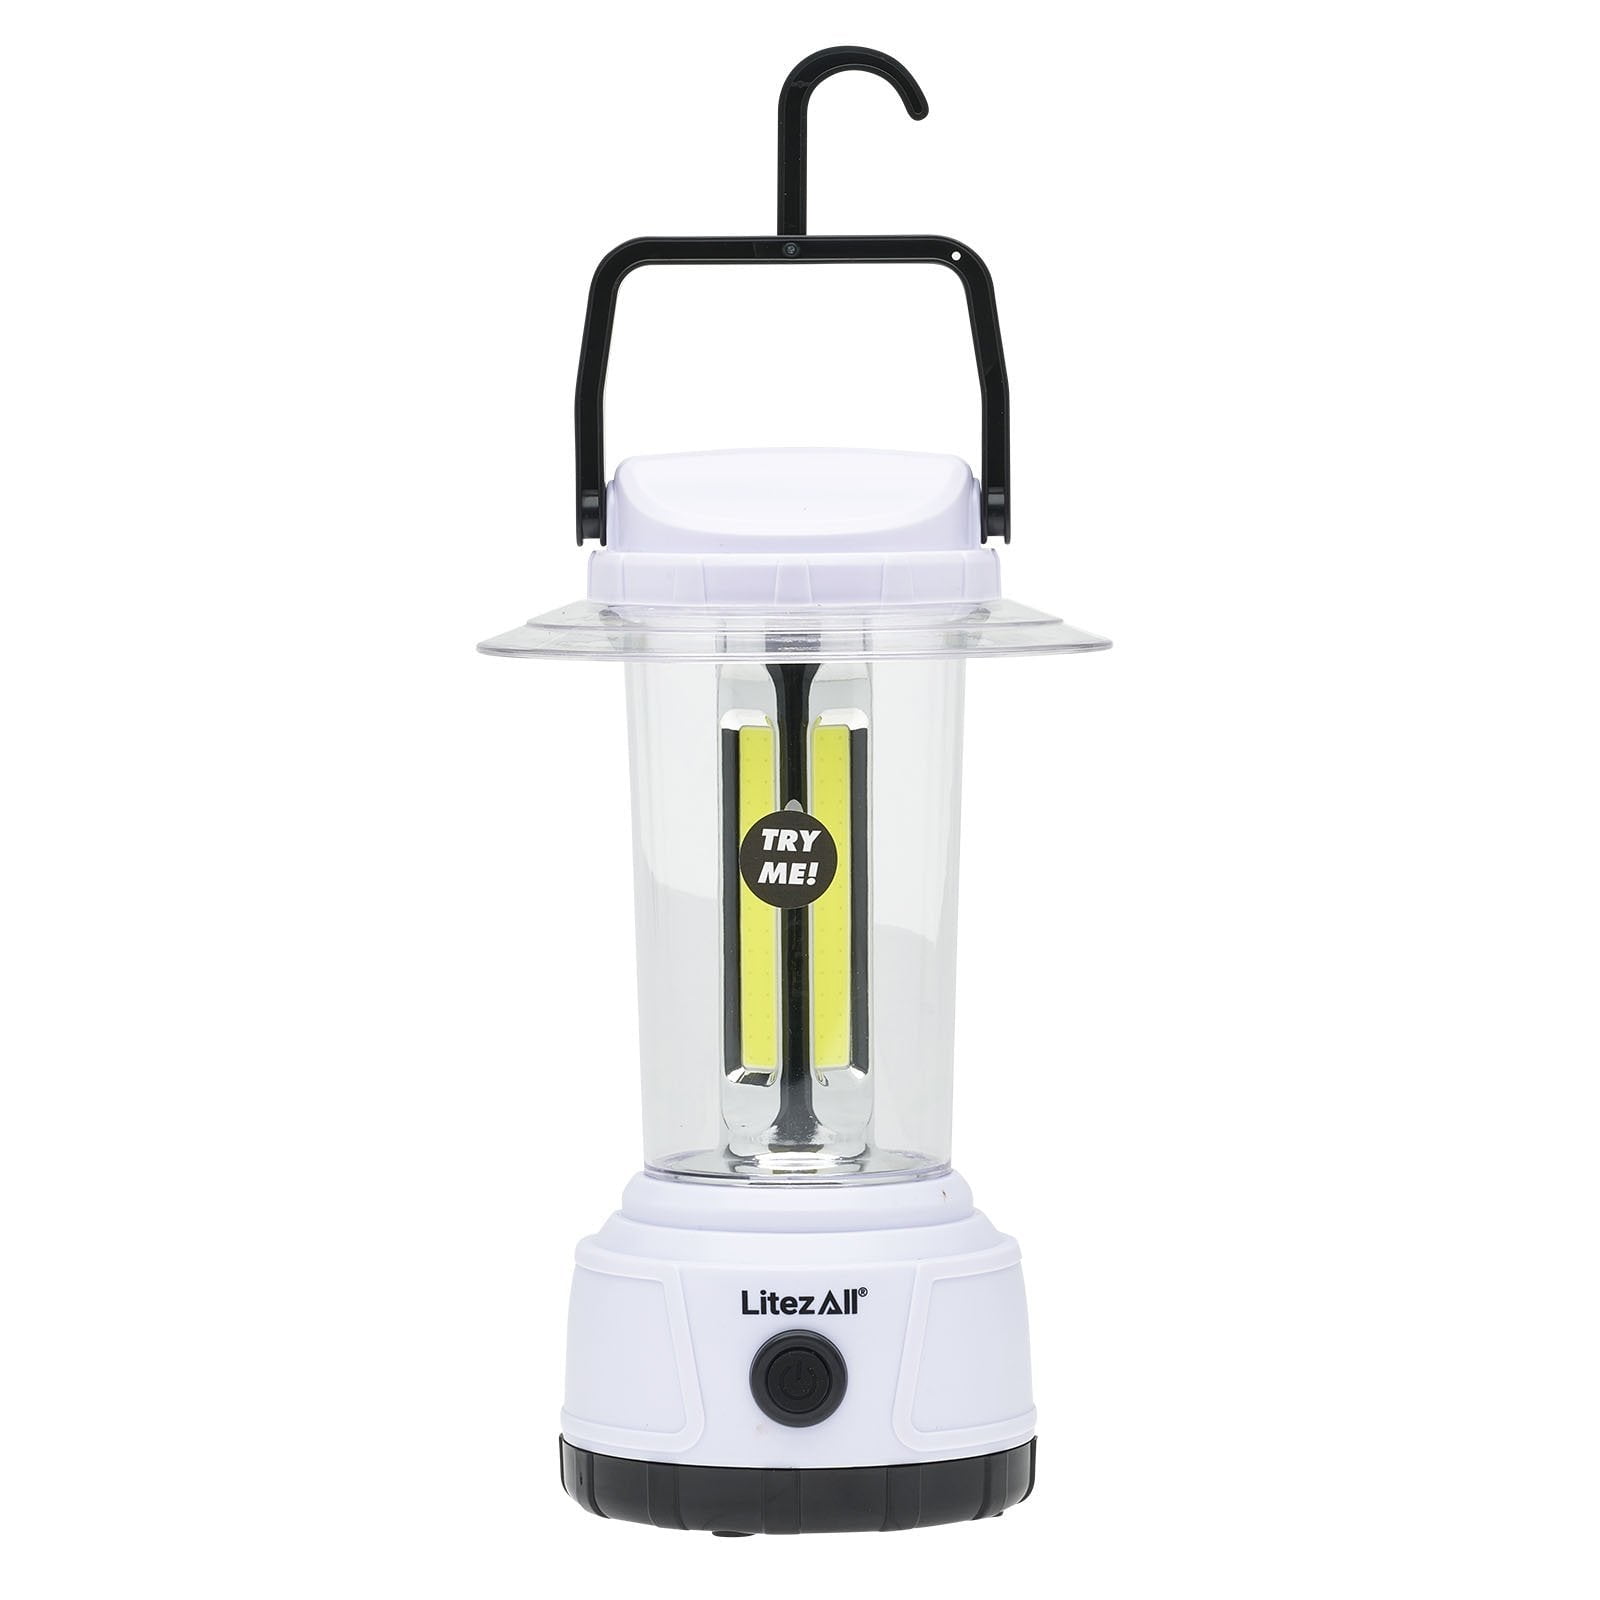 Lepro 350LM Mini LED Camping Lantern with 4 Light Modes for